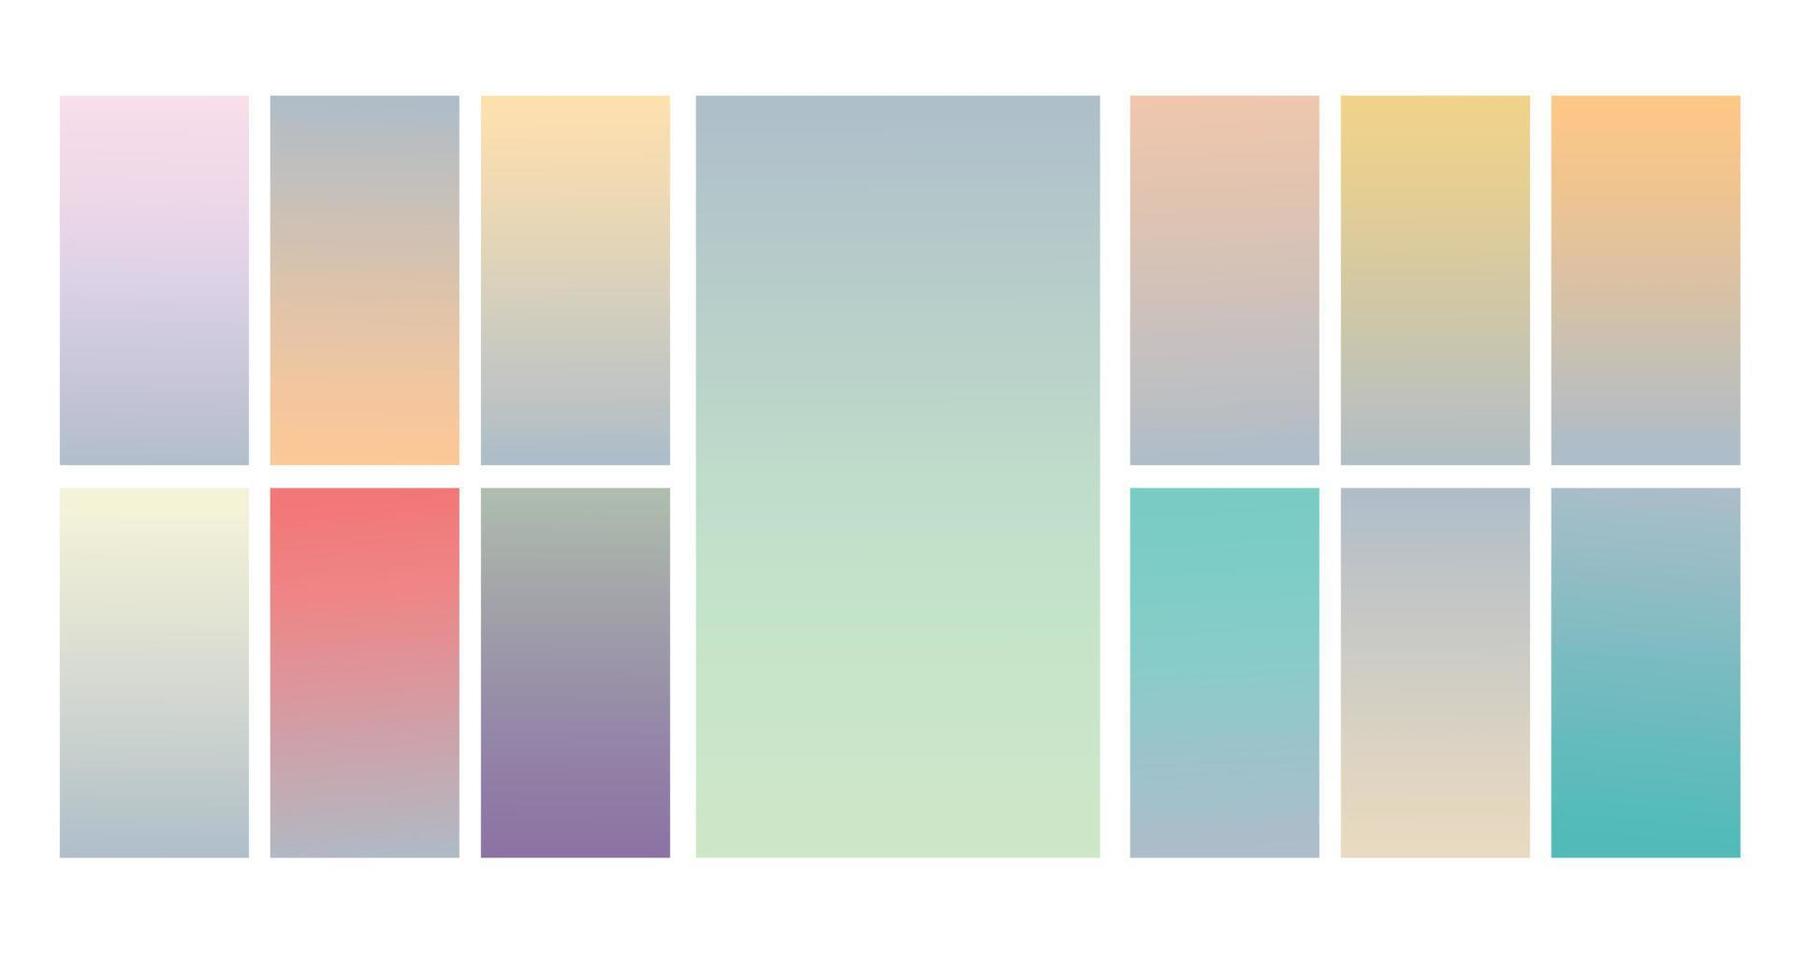 Modern Screen vector pastel gradient Background. Vibrant smooth soft color gradient for Mobile Apps, background Design. Bright Soft Color Gradient for mobile apps.